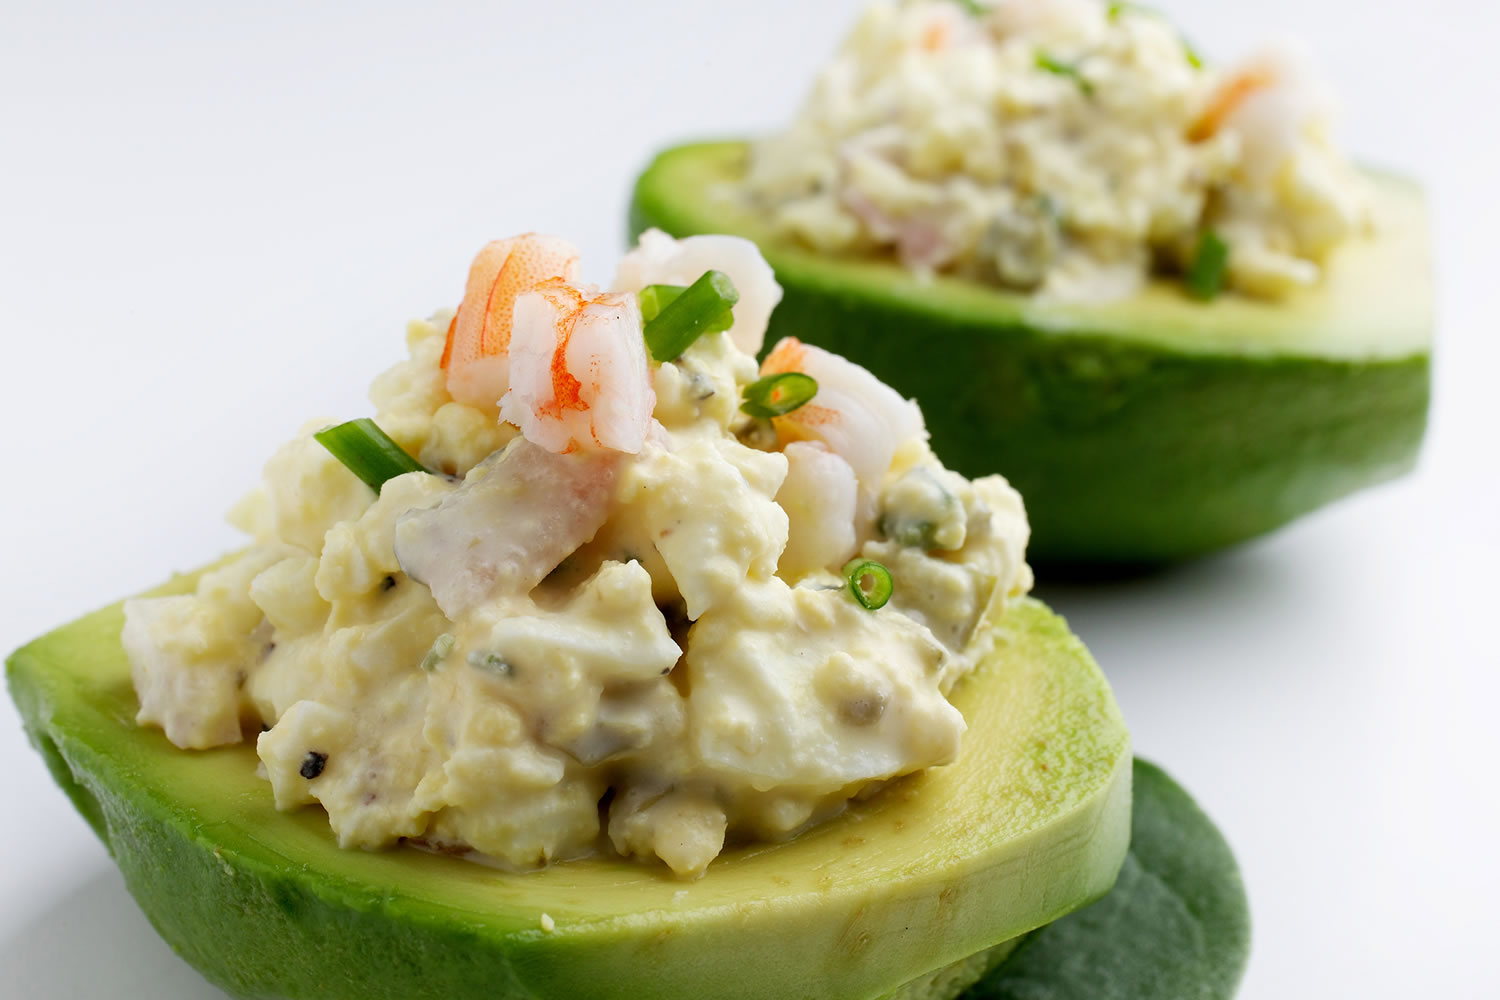 Classic Egg Salad is amenable to many flavor boosts and other variations .